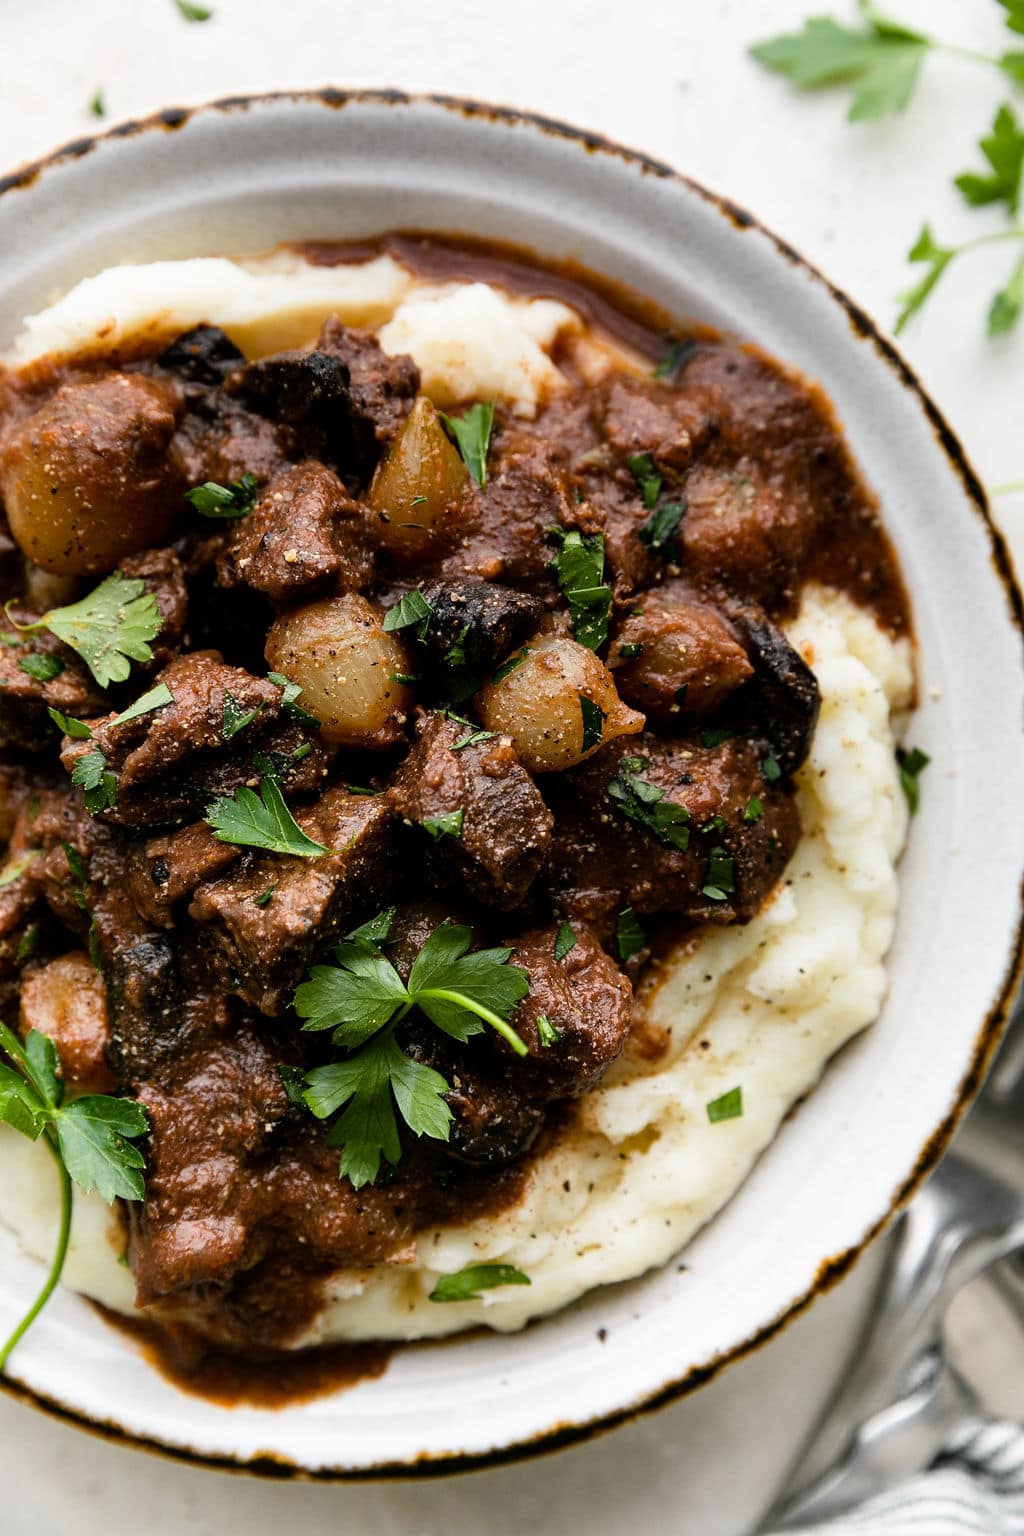 https://therealfooddietitians.com/wp-content/uploads/2021/11/Slow-Cooker-Beef-Tips-with-Gravy-6.jpg